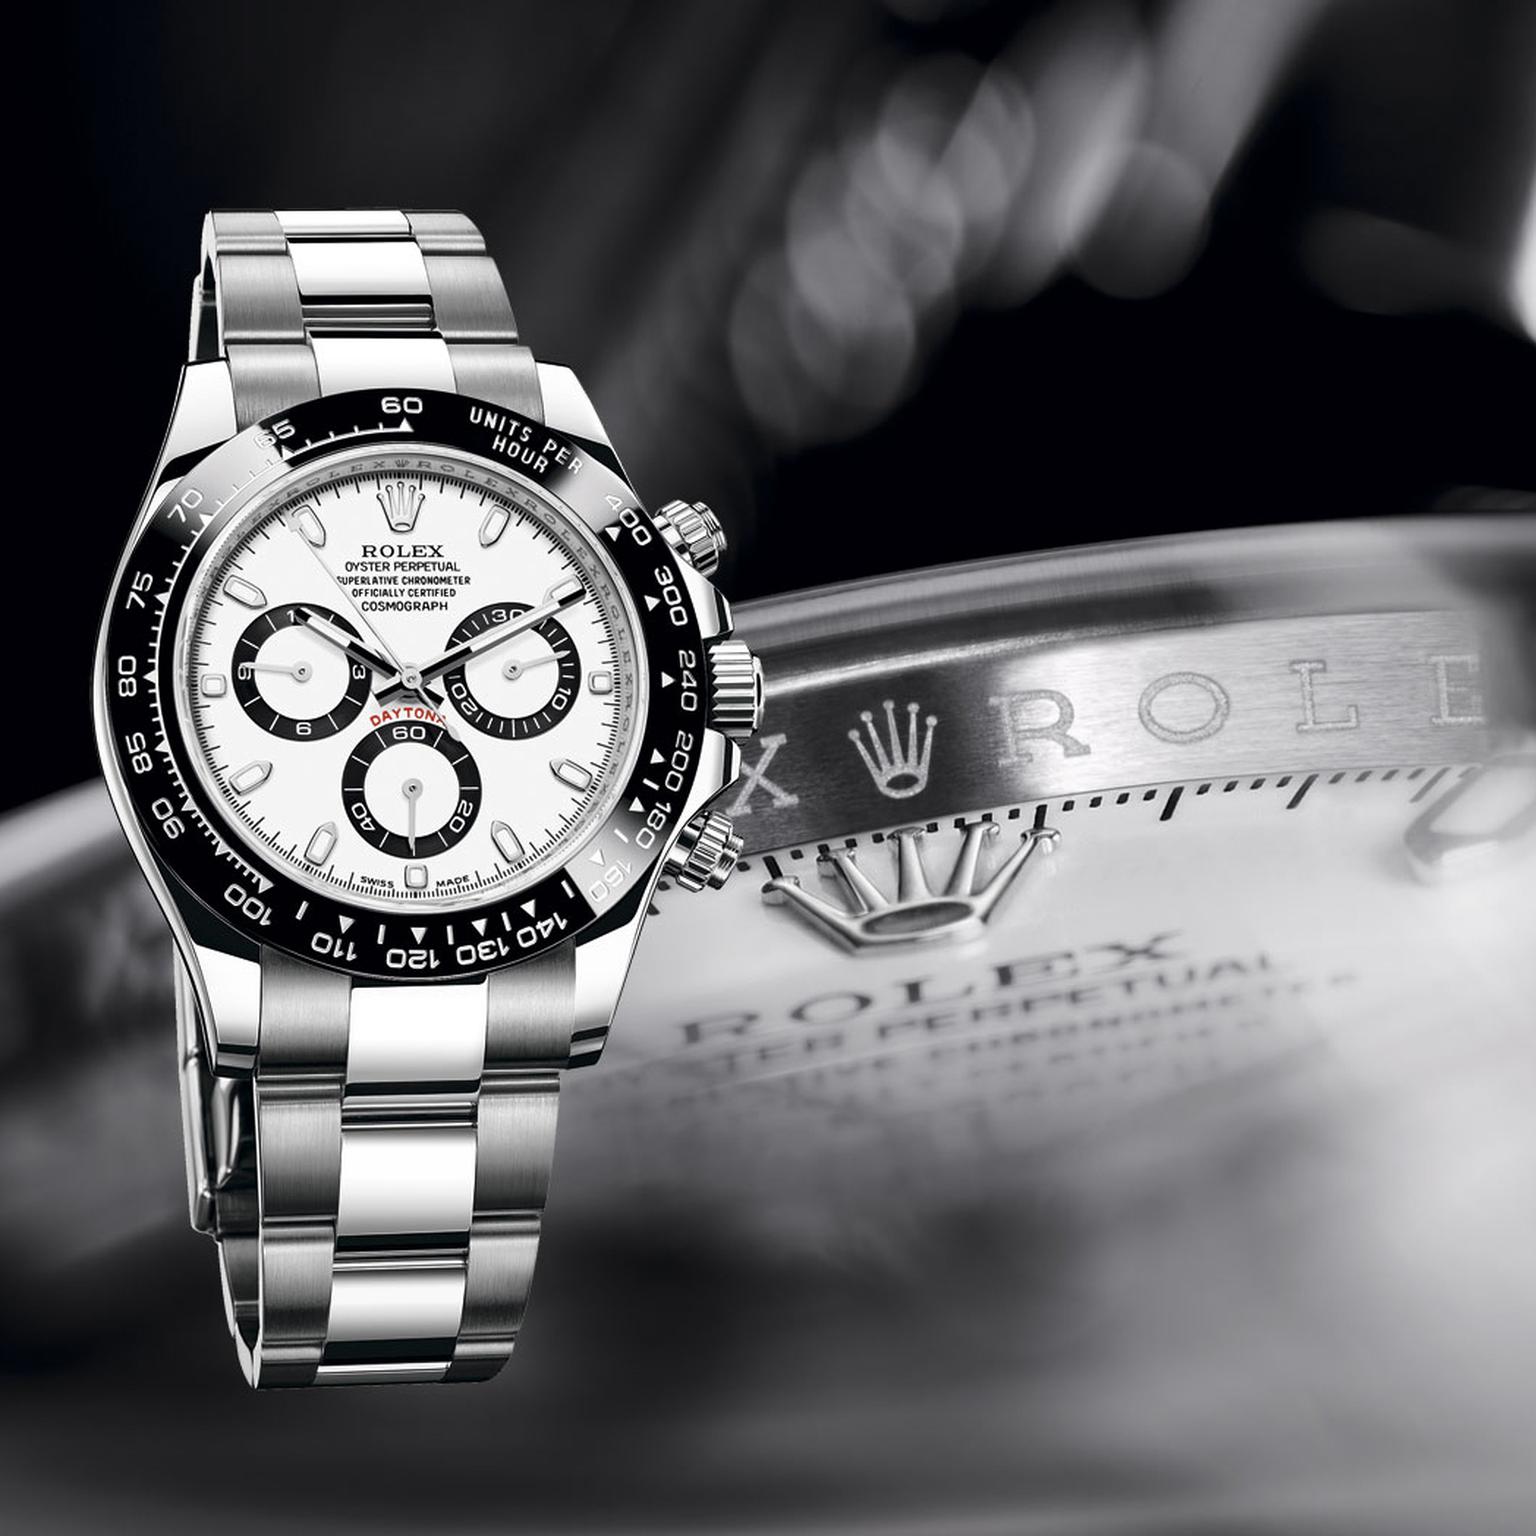 Rolex Watches: The top 5 pre-owned models from Bob's Watches